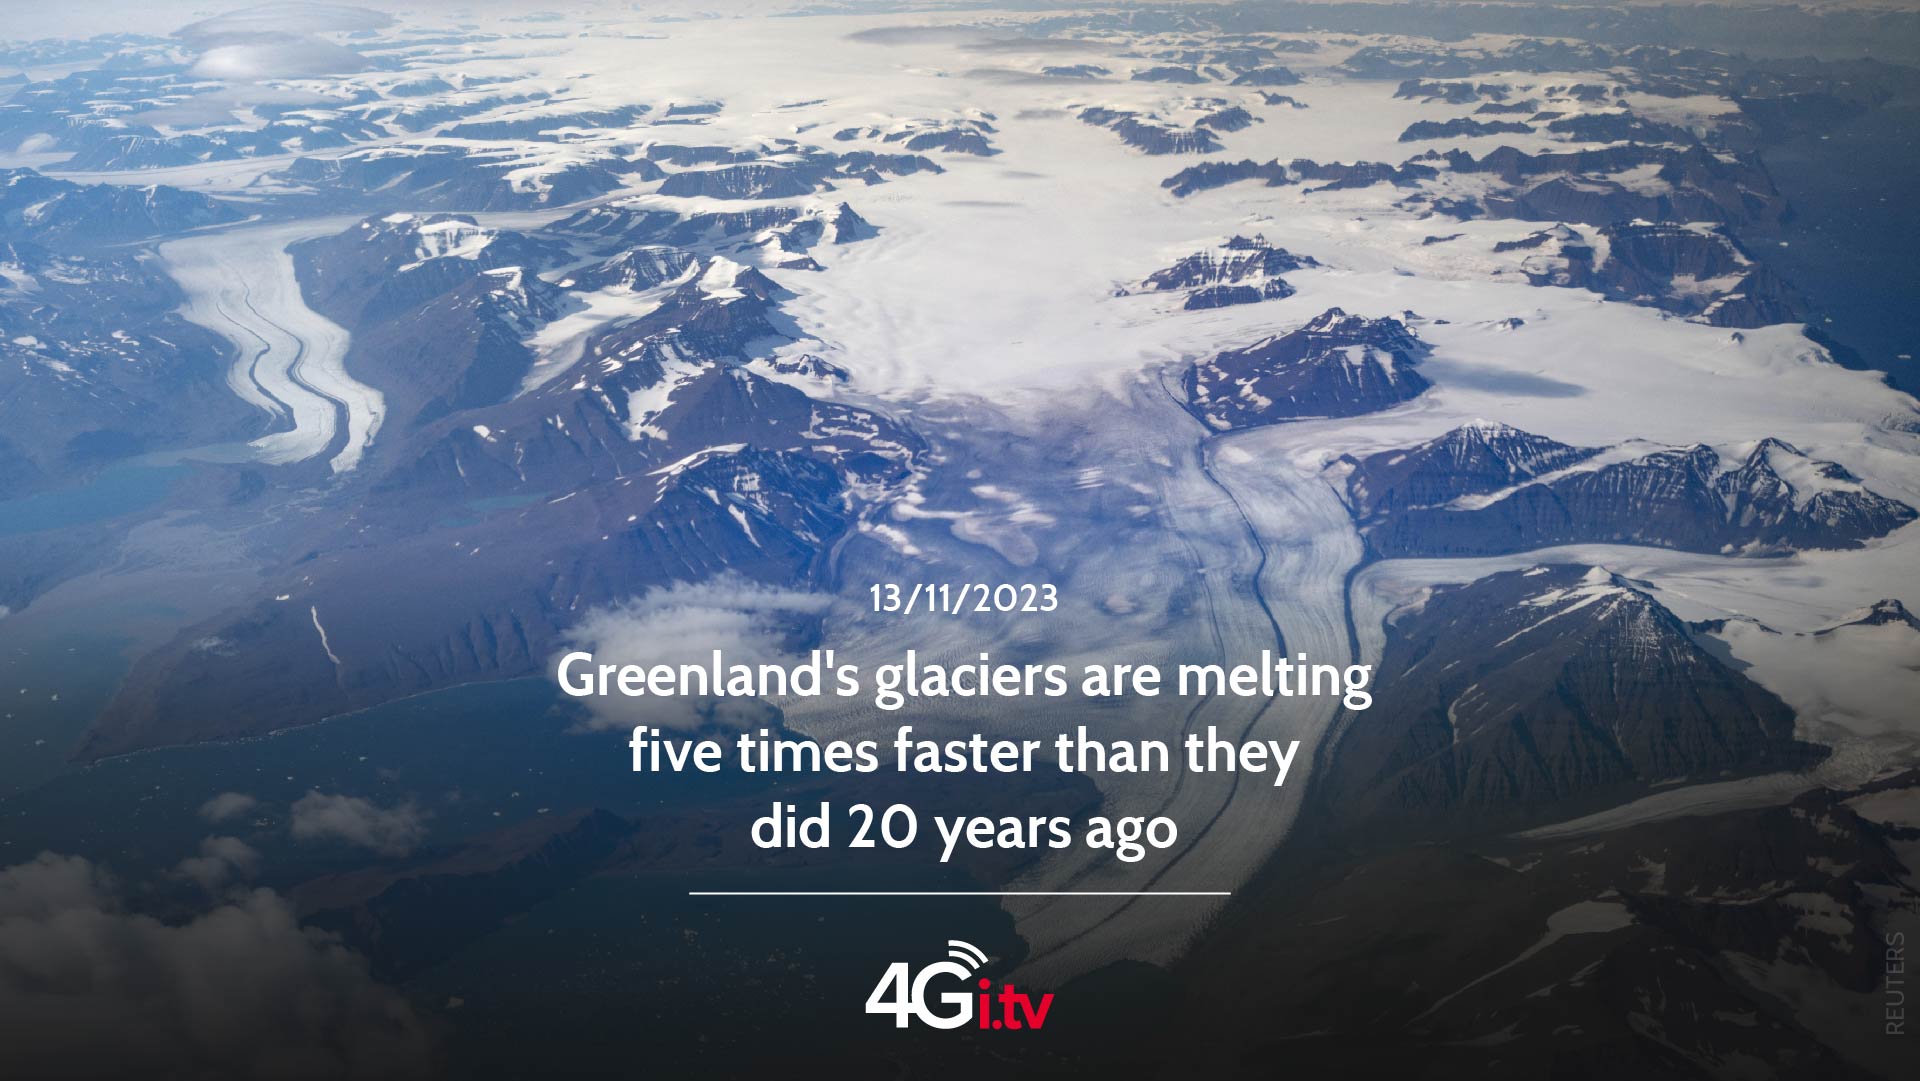 Lesen Sie mehr über den Artikel Greenland’s glaciers are melting five times faster than they did 20 years ago